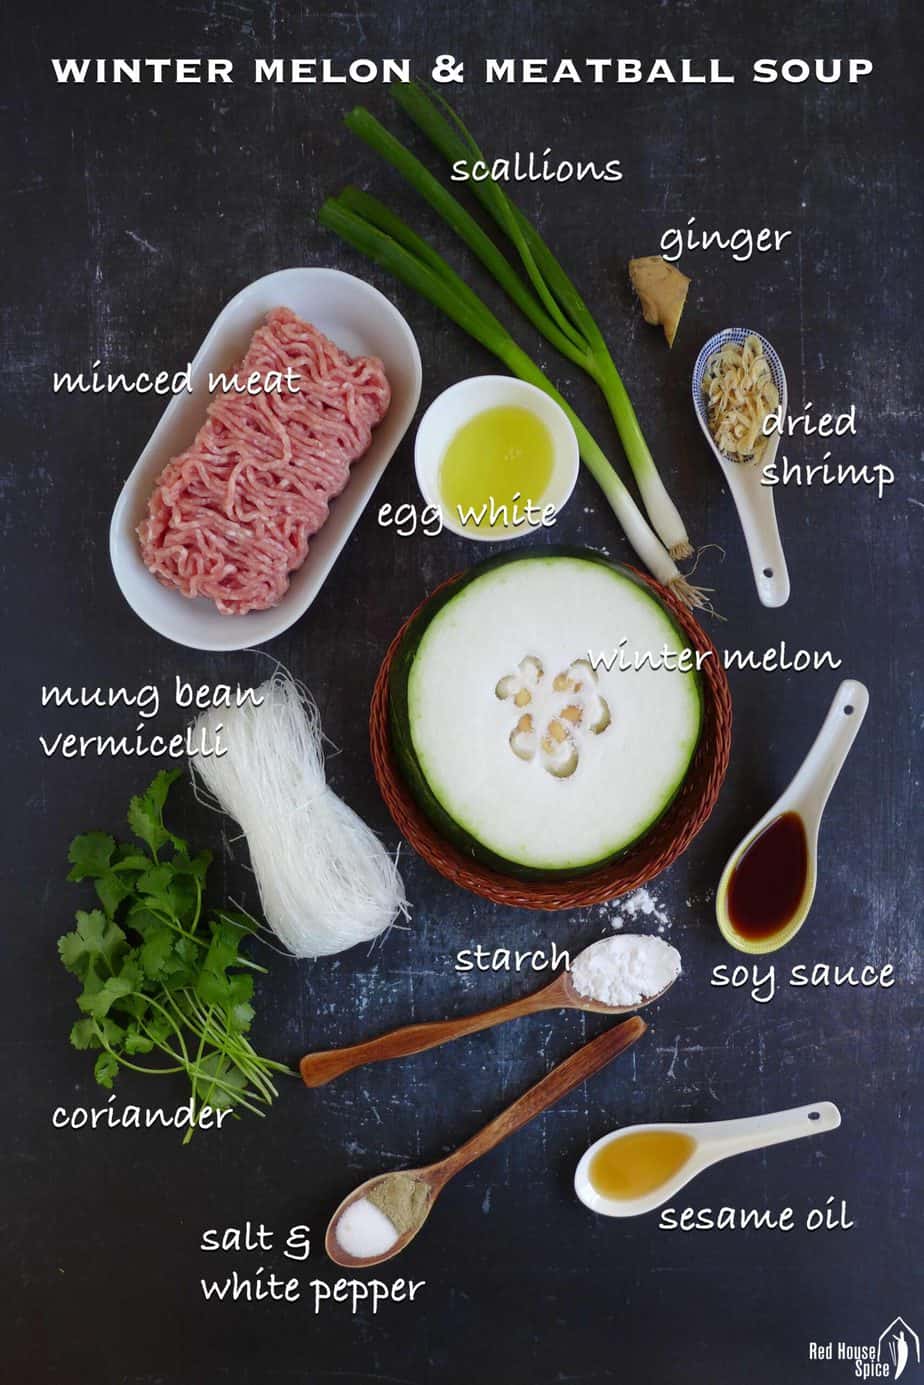 A group ingredients for making winter melon & meatball soup.